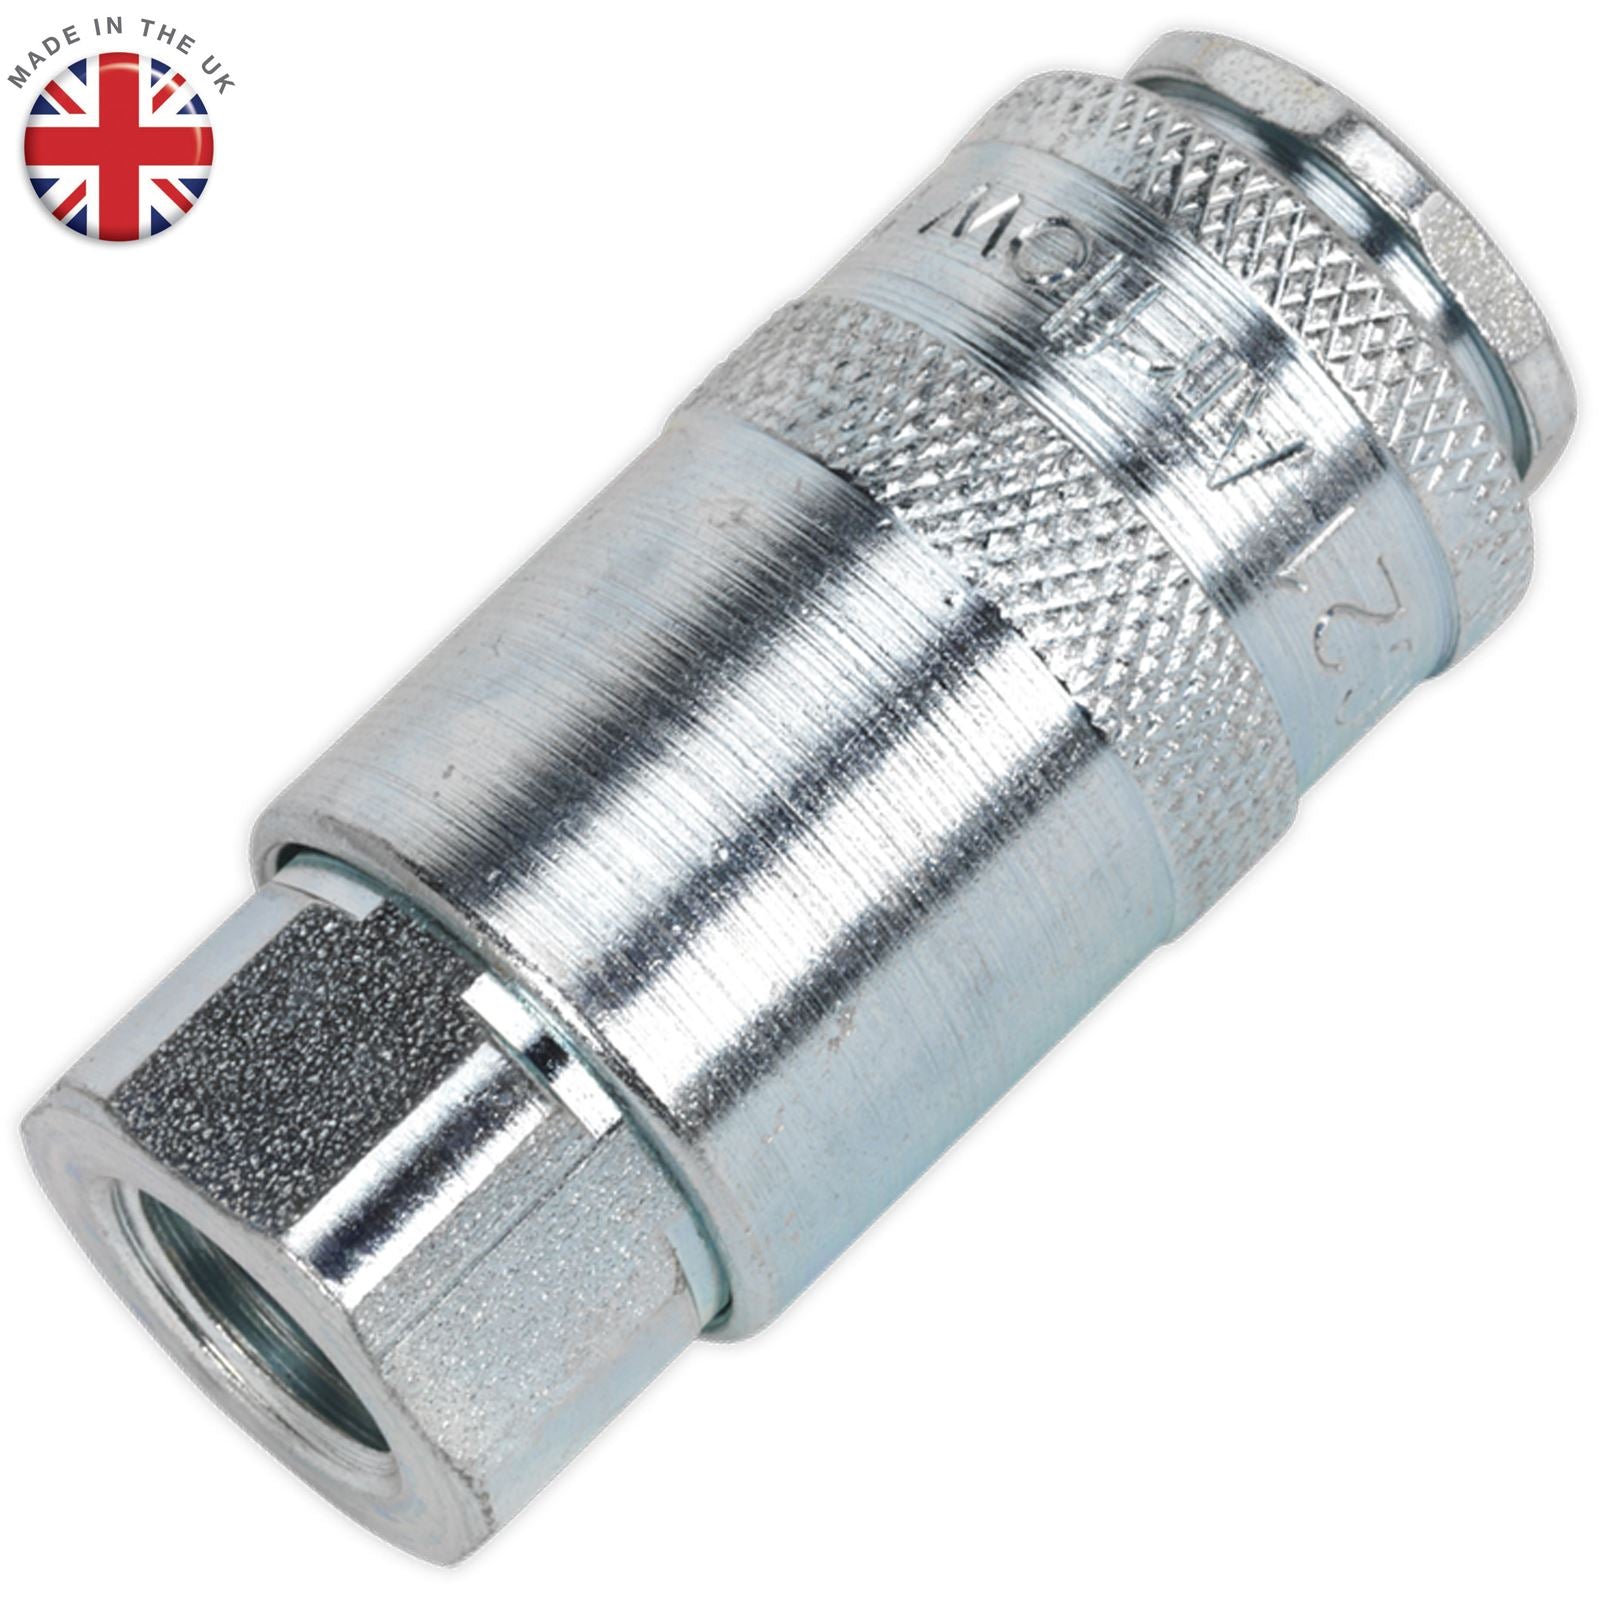 Sealey 1/4" BSP Female Quick Coupler Air Line Fitting Connector Compressor